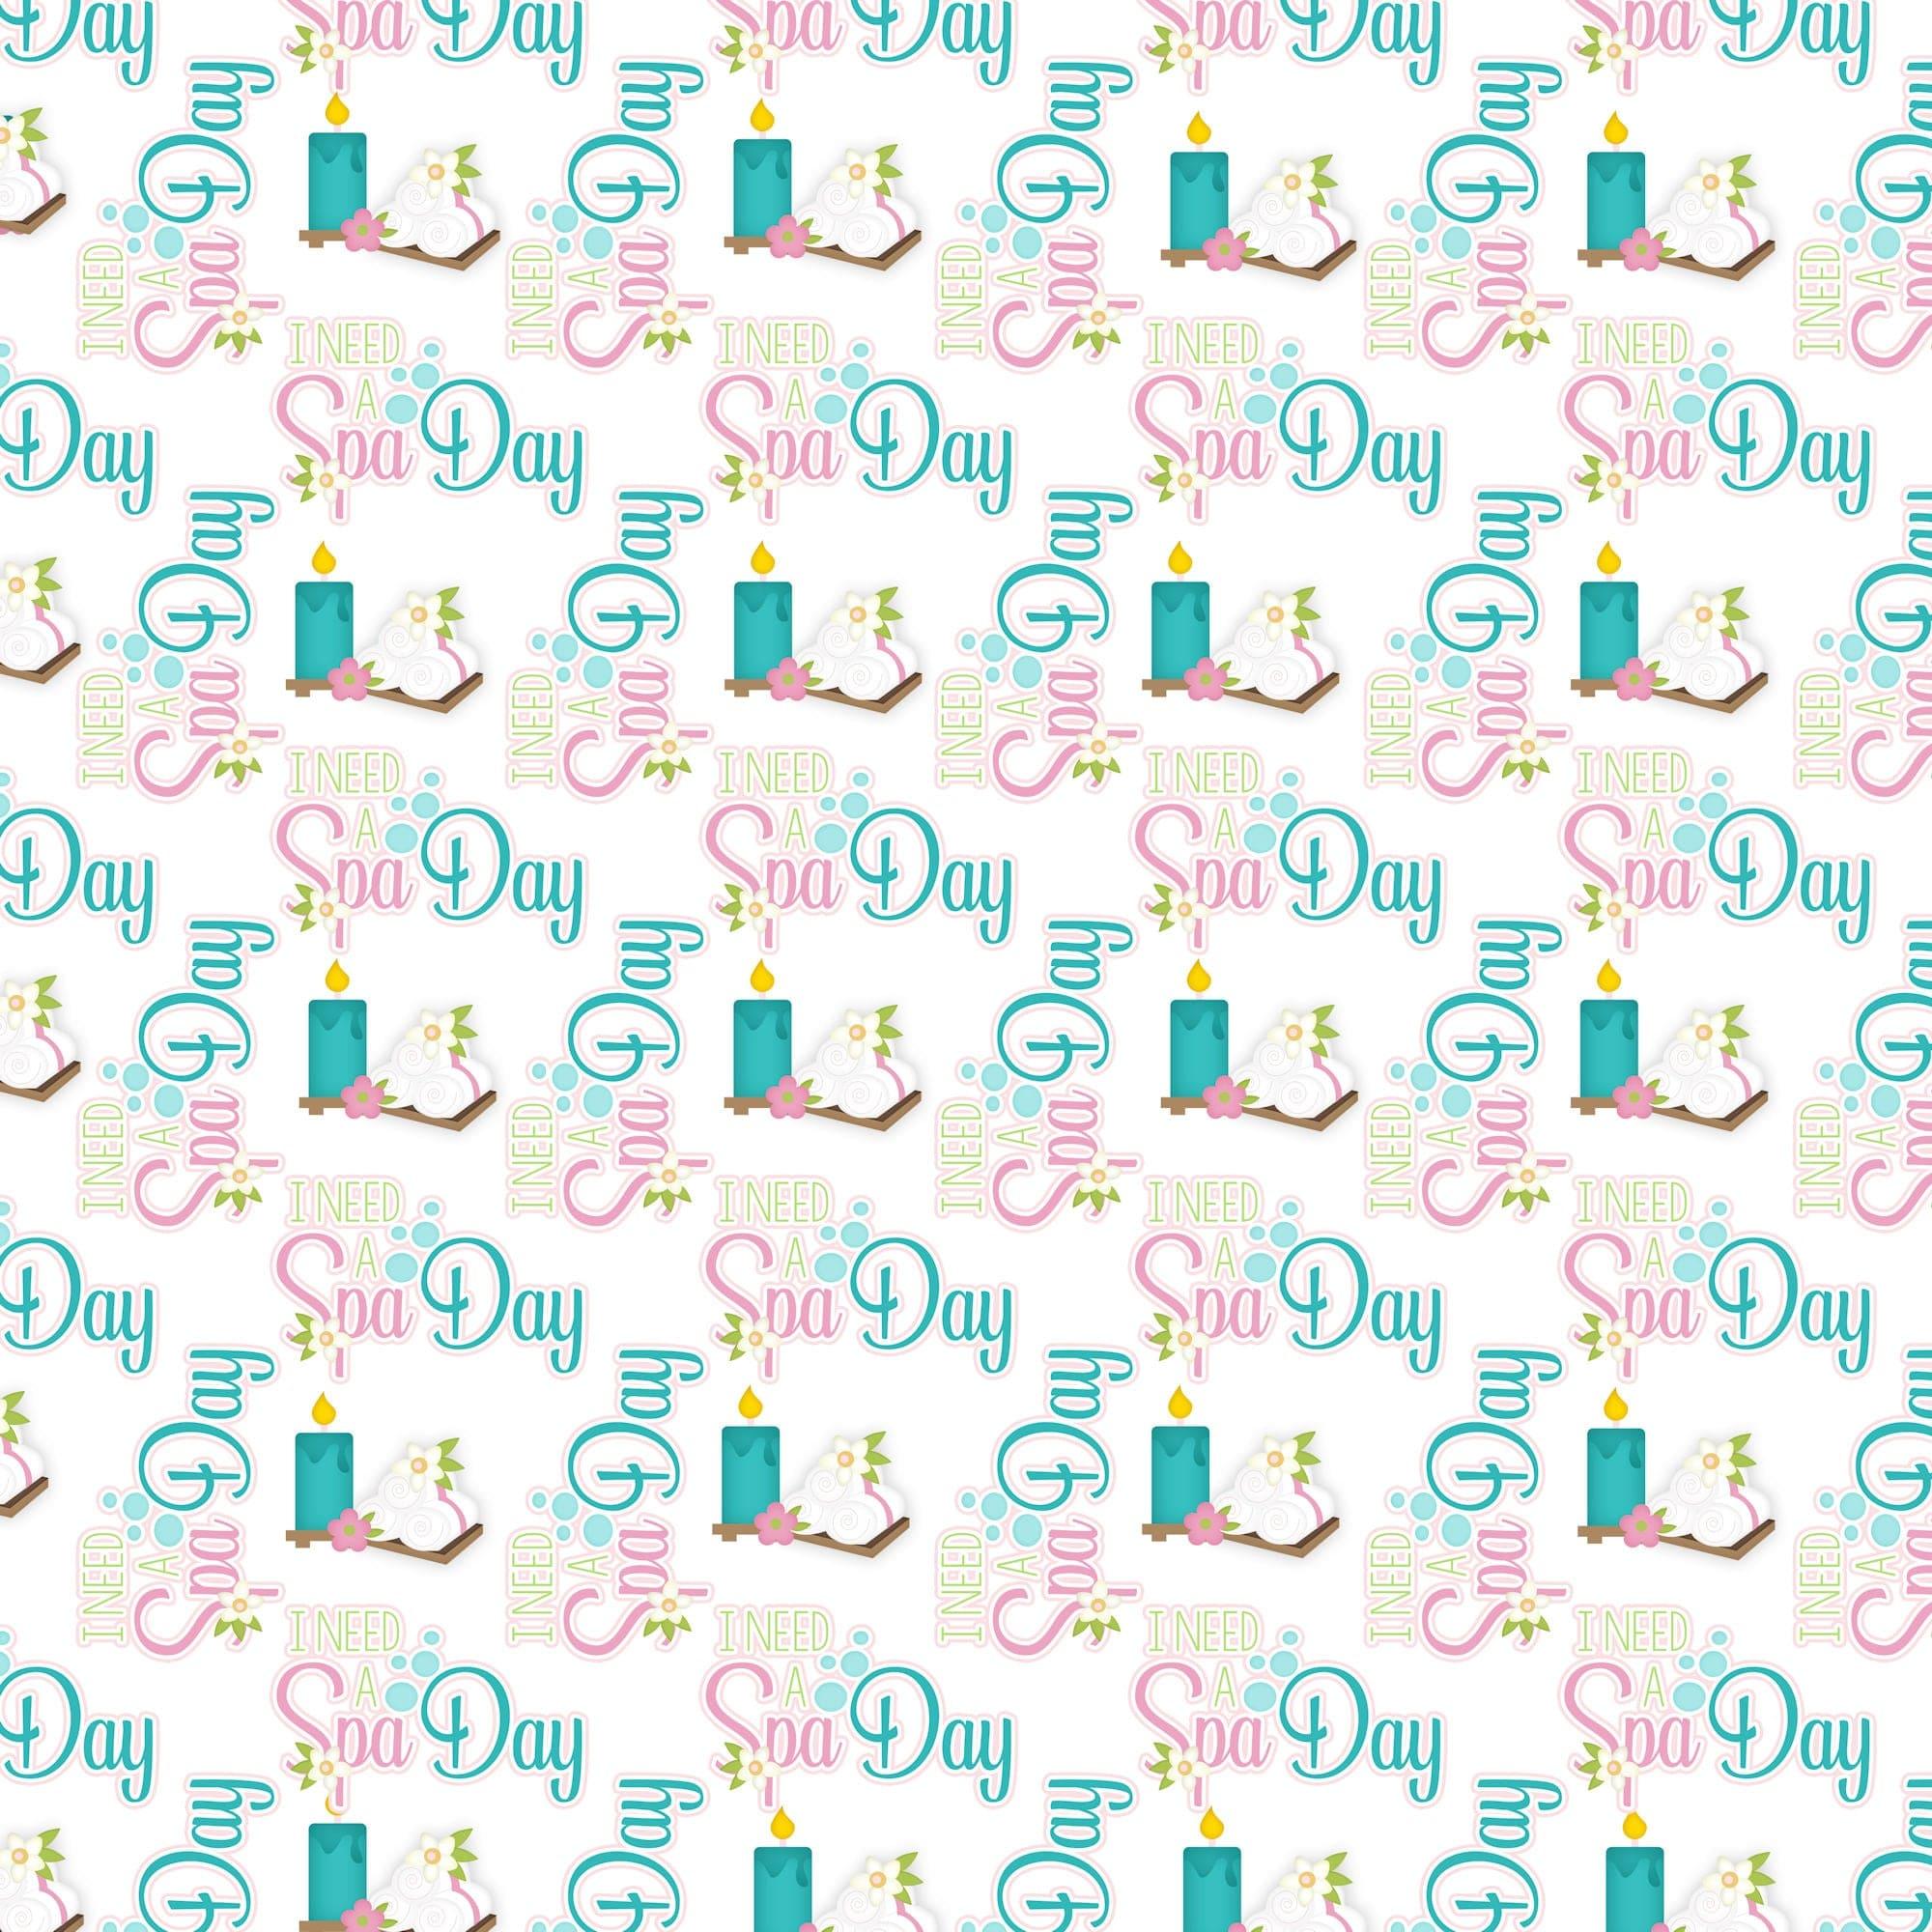 Just Fun Collection Spa Day 12 x 12 Double-Sided Scrapbook Paper by SSC Designs - Scrapbook Supply Companies